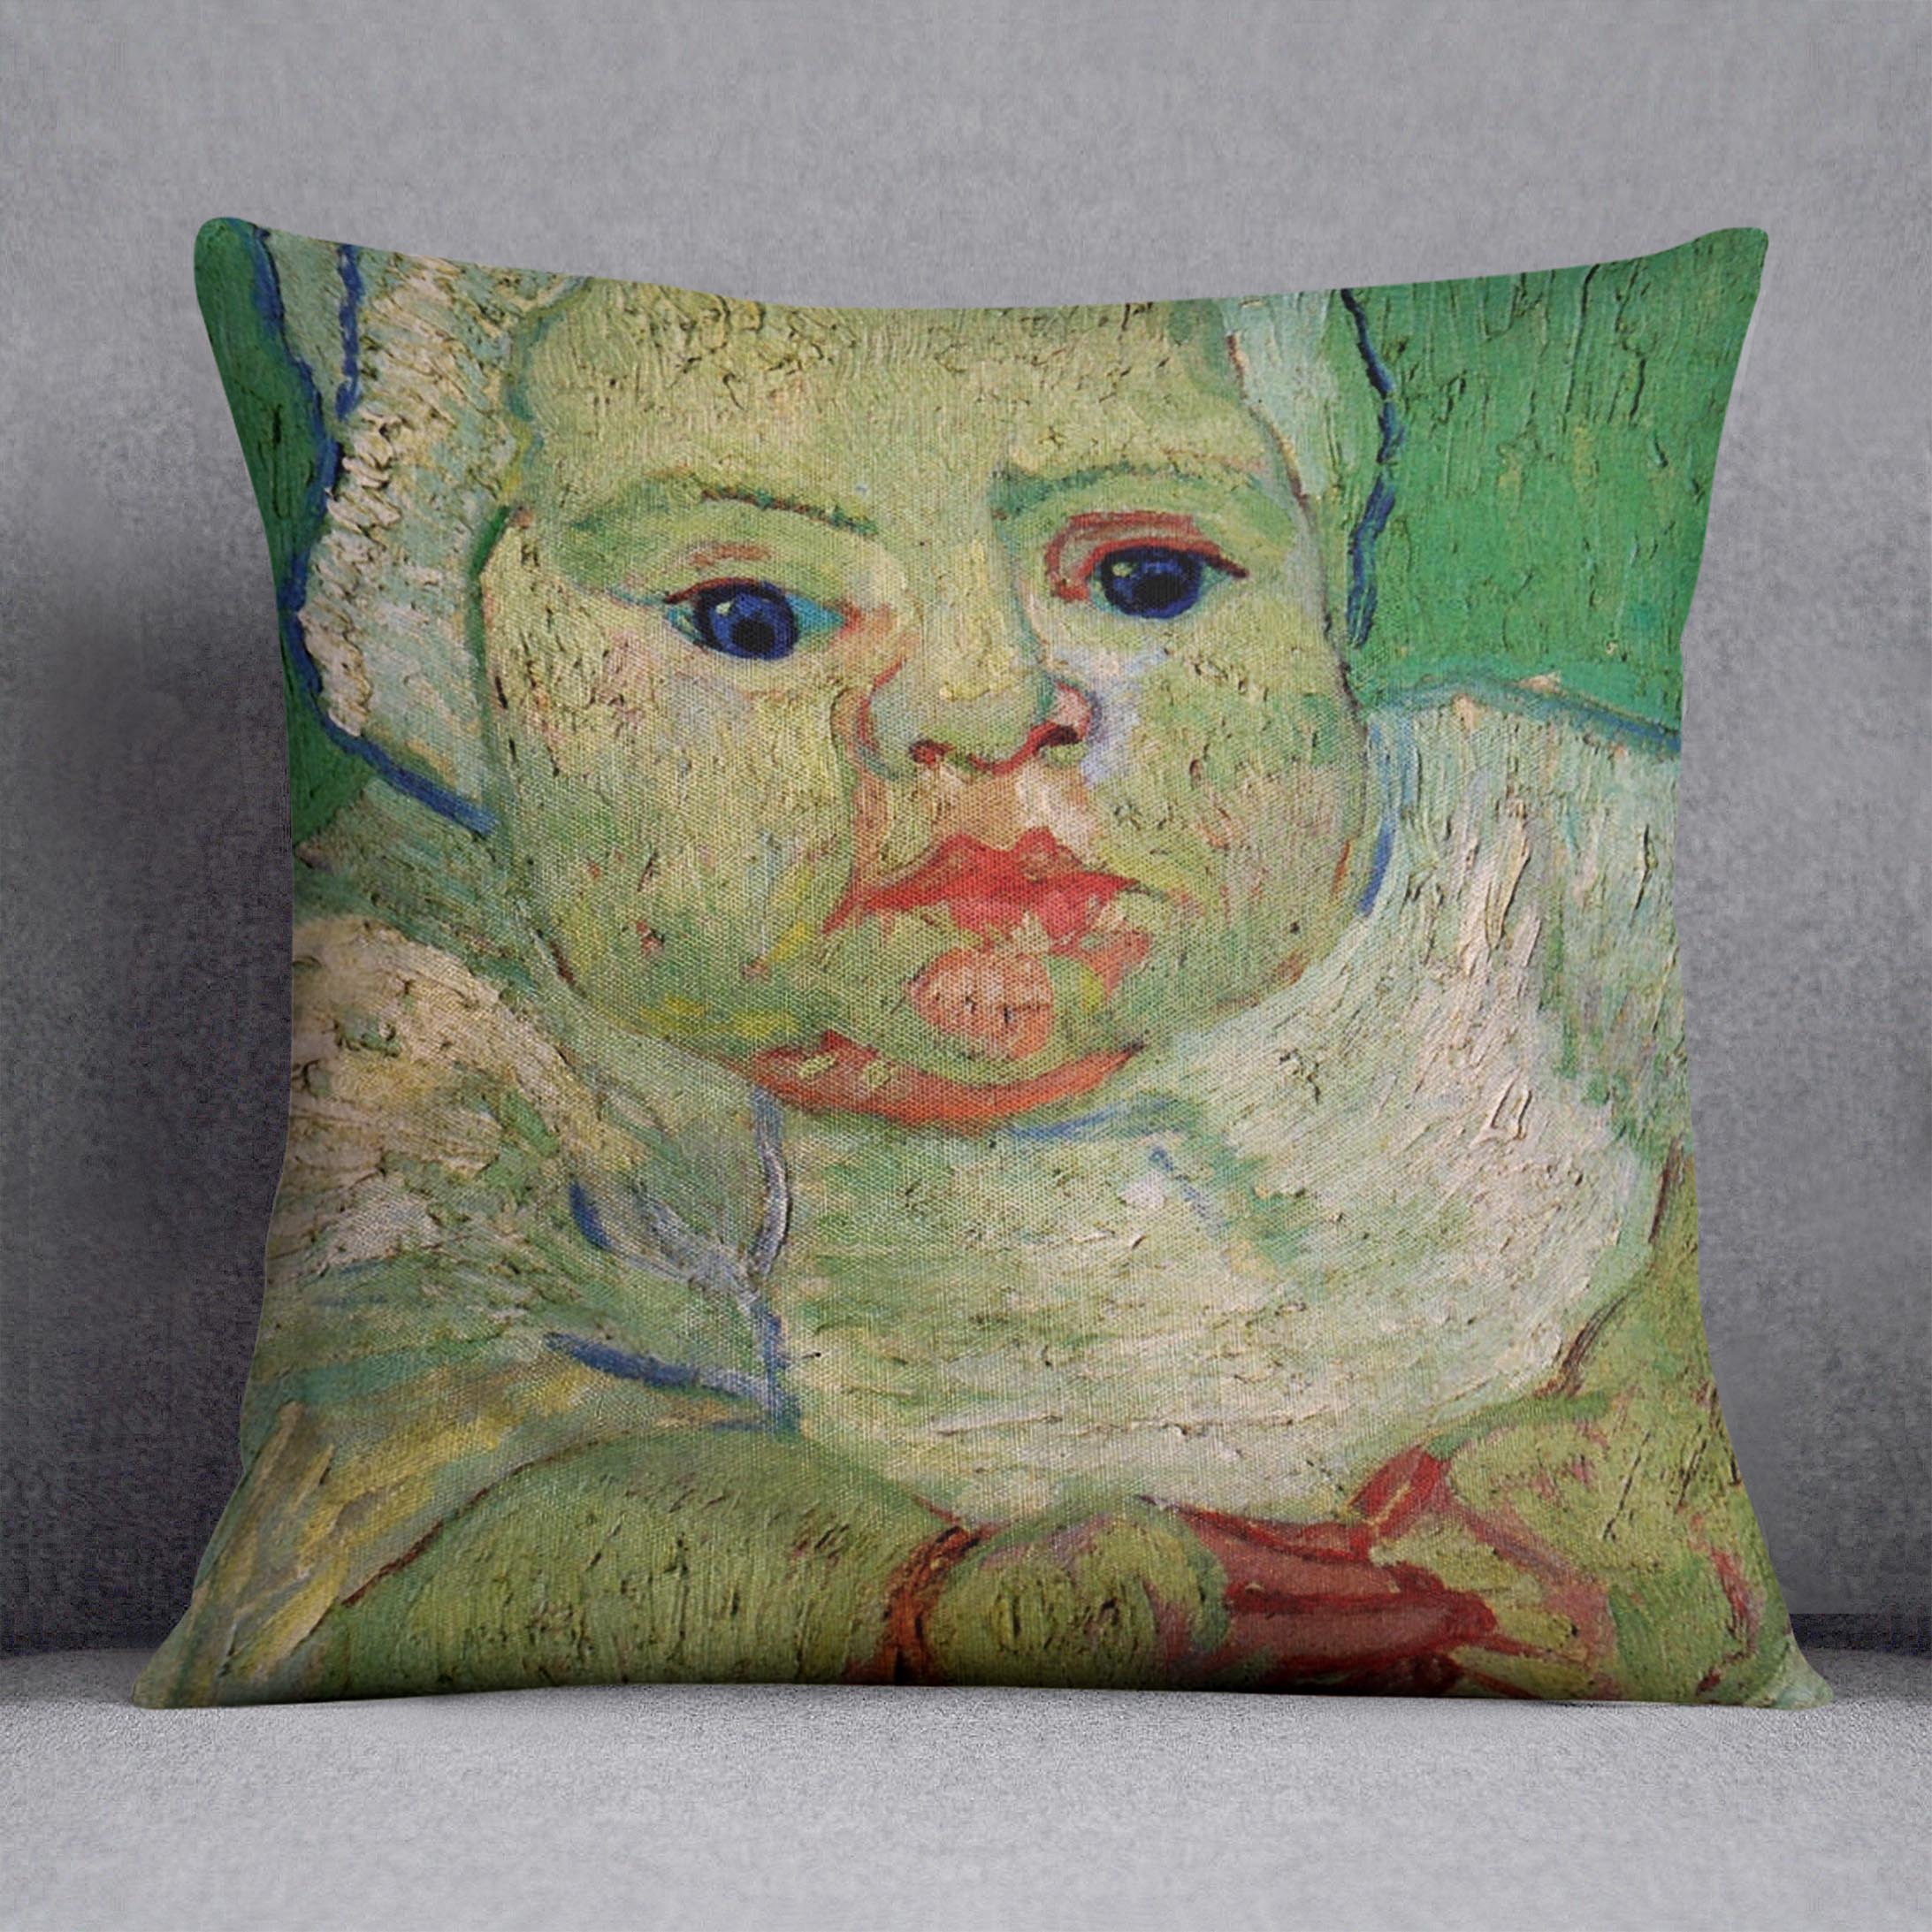 The Baby Marcelle Roulin by Van Gogh Cushion